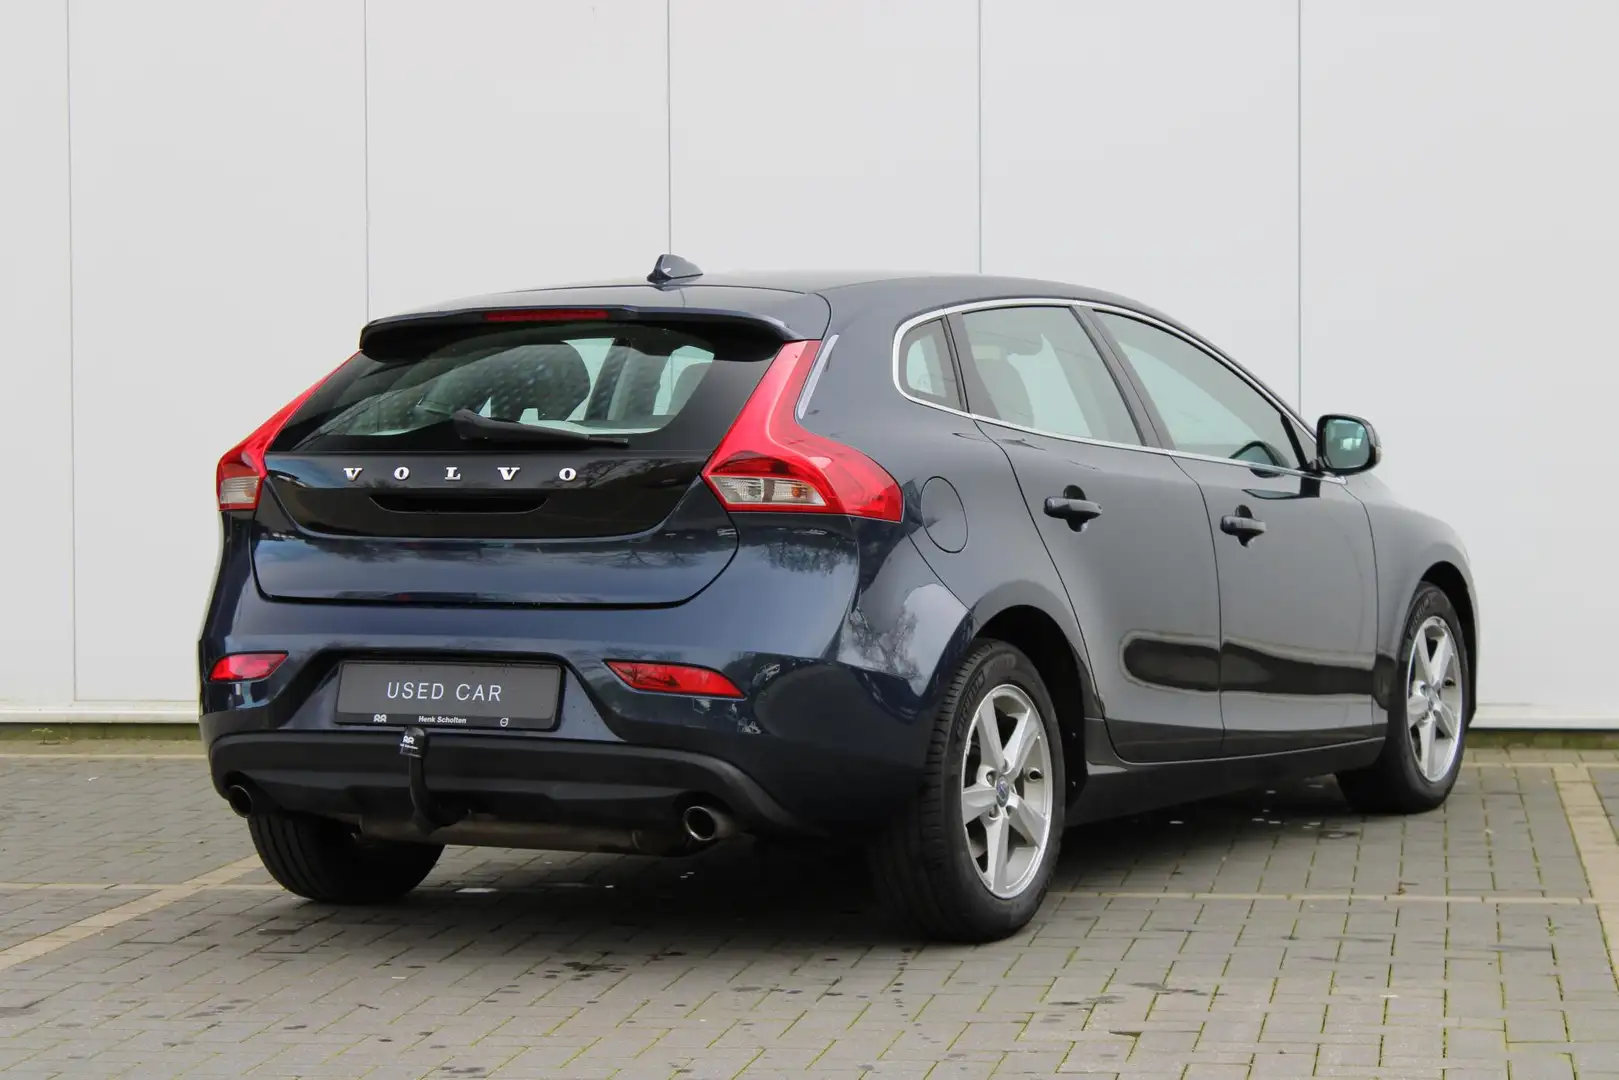 Volvo V40 T2 120PK Momentum, Electronic Climate Control, Ver Blauw - 2